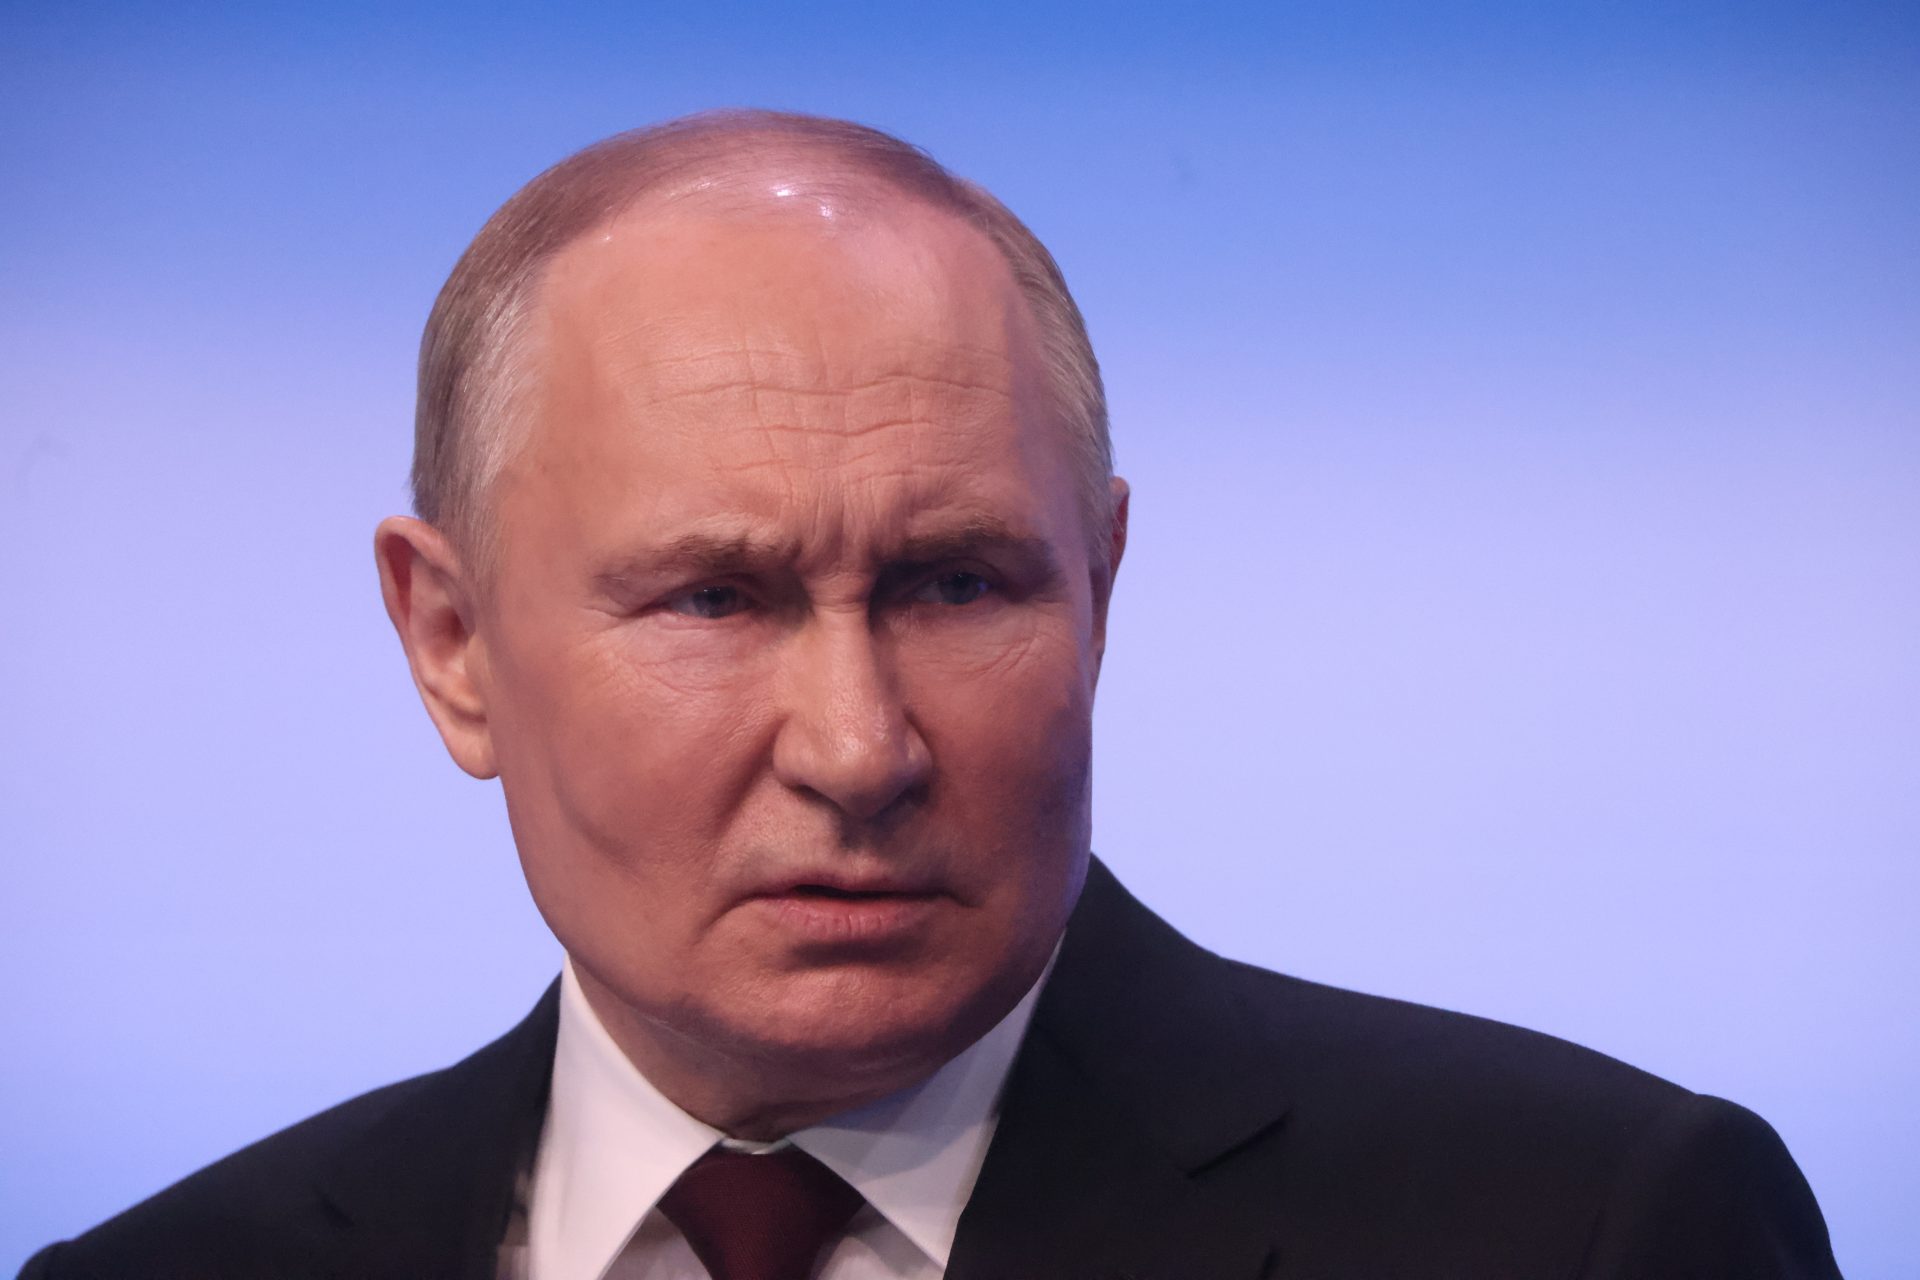 What is Putin planning for his next six years in office?